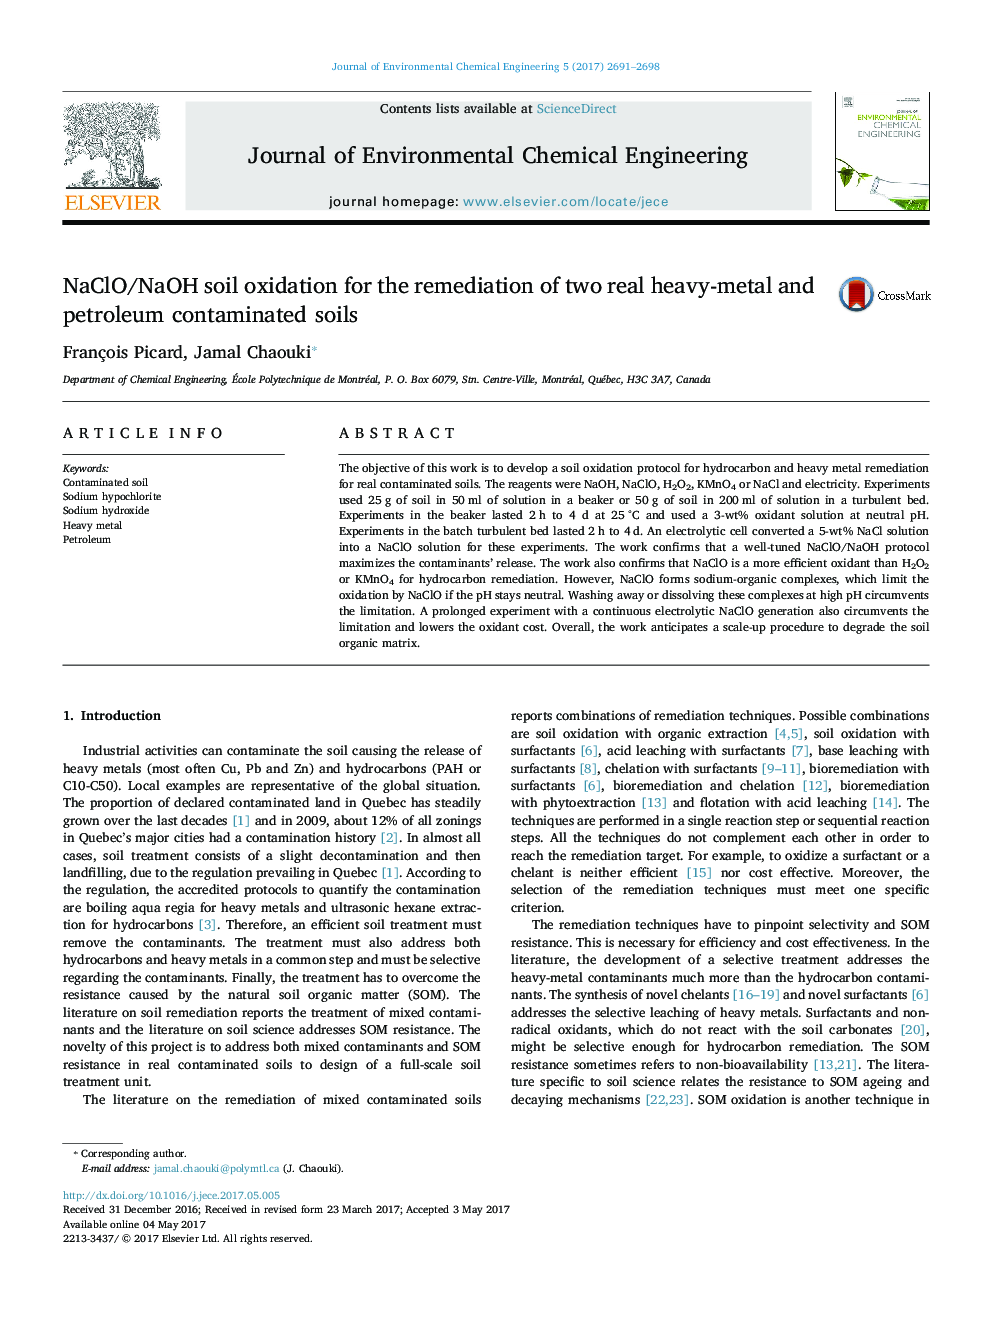 NaClO/NaOH soil oxidation for the remediation of two real heavy-metal and petroleum contaminated soils